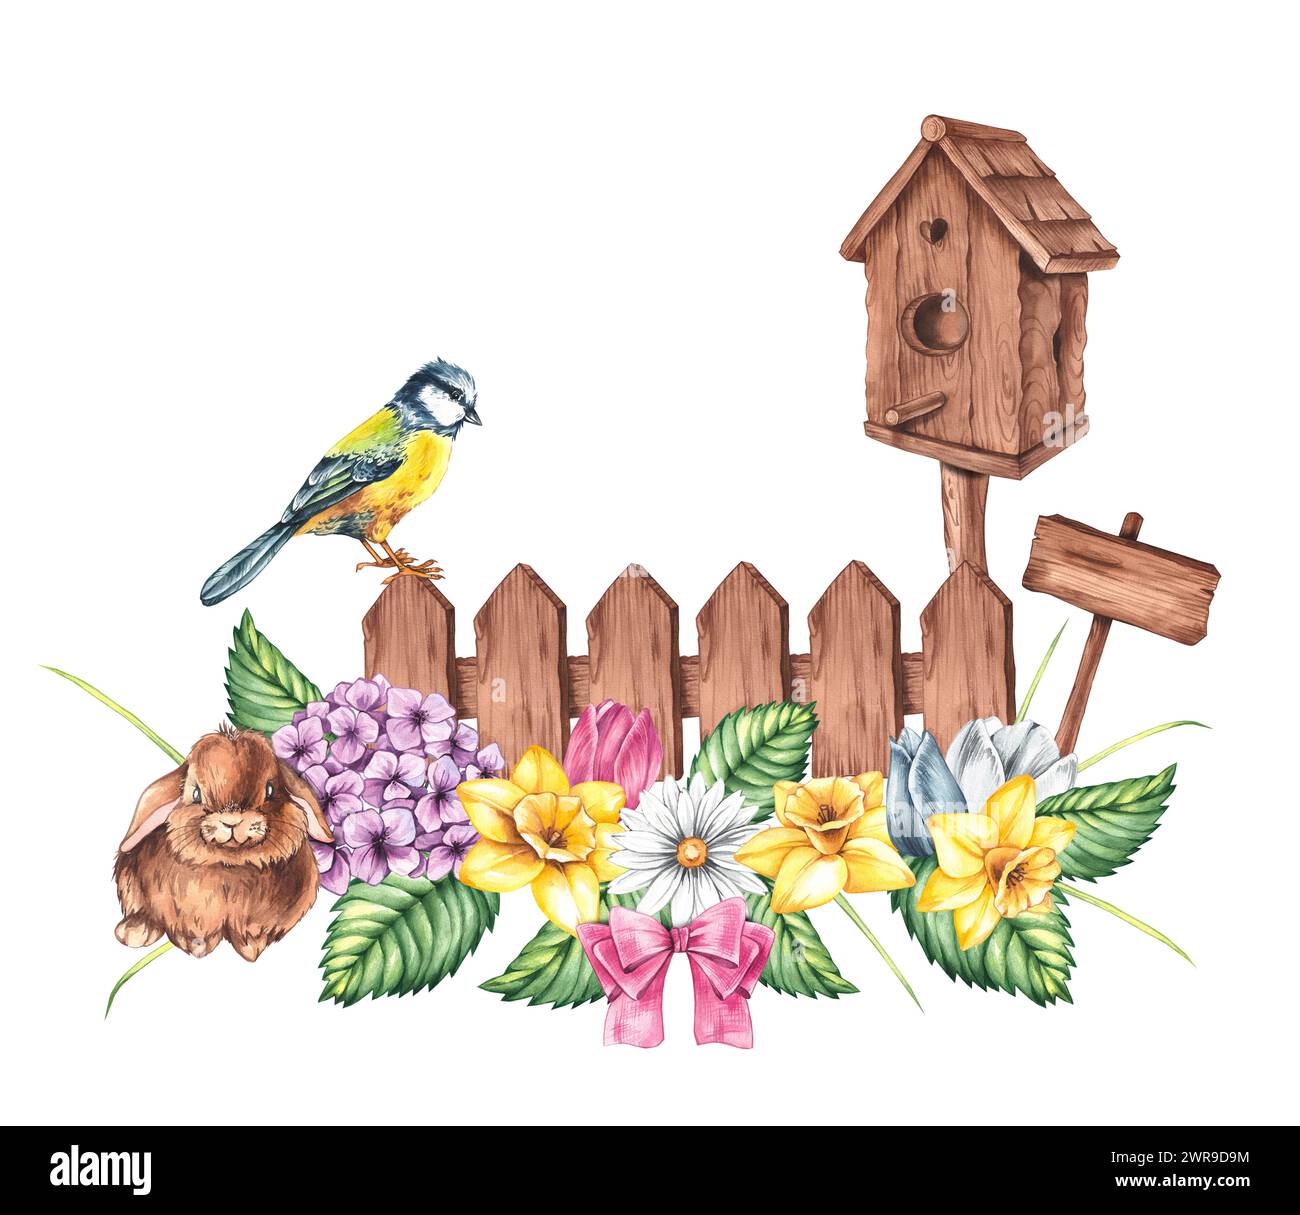 Spring watercolor illustration with flowers, cute bunny and birds isolated on white. Spring garden with birdhouse, gardening tools and pets for packag Stock Photo